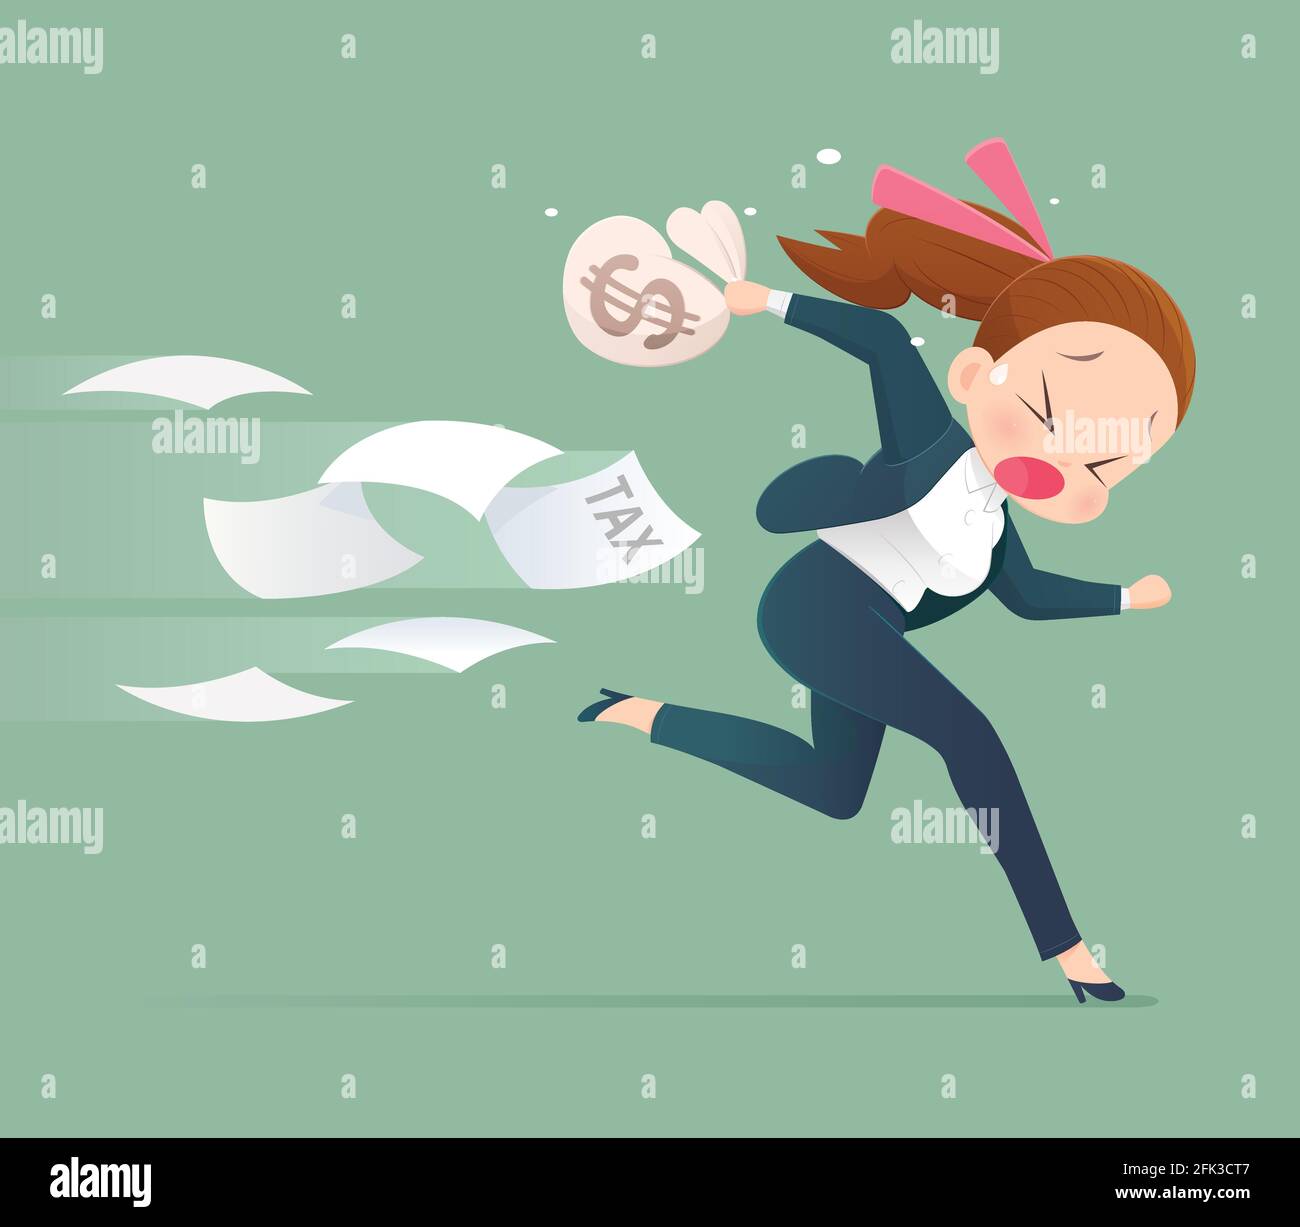 Businessman running away from tax,  Business concept illustration. Stock Vector